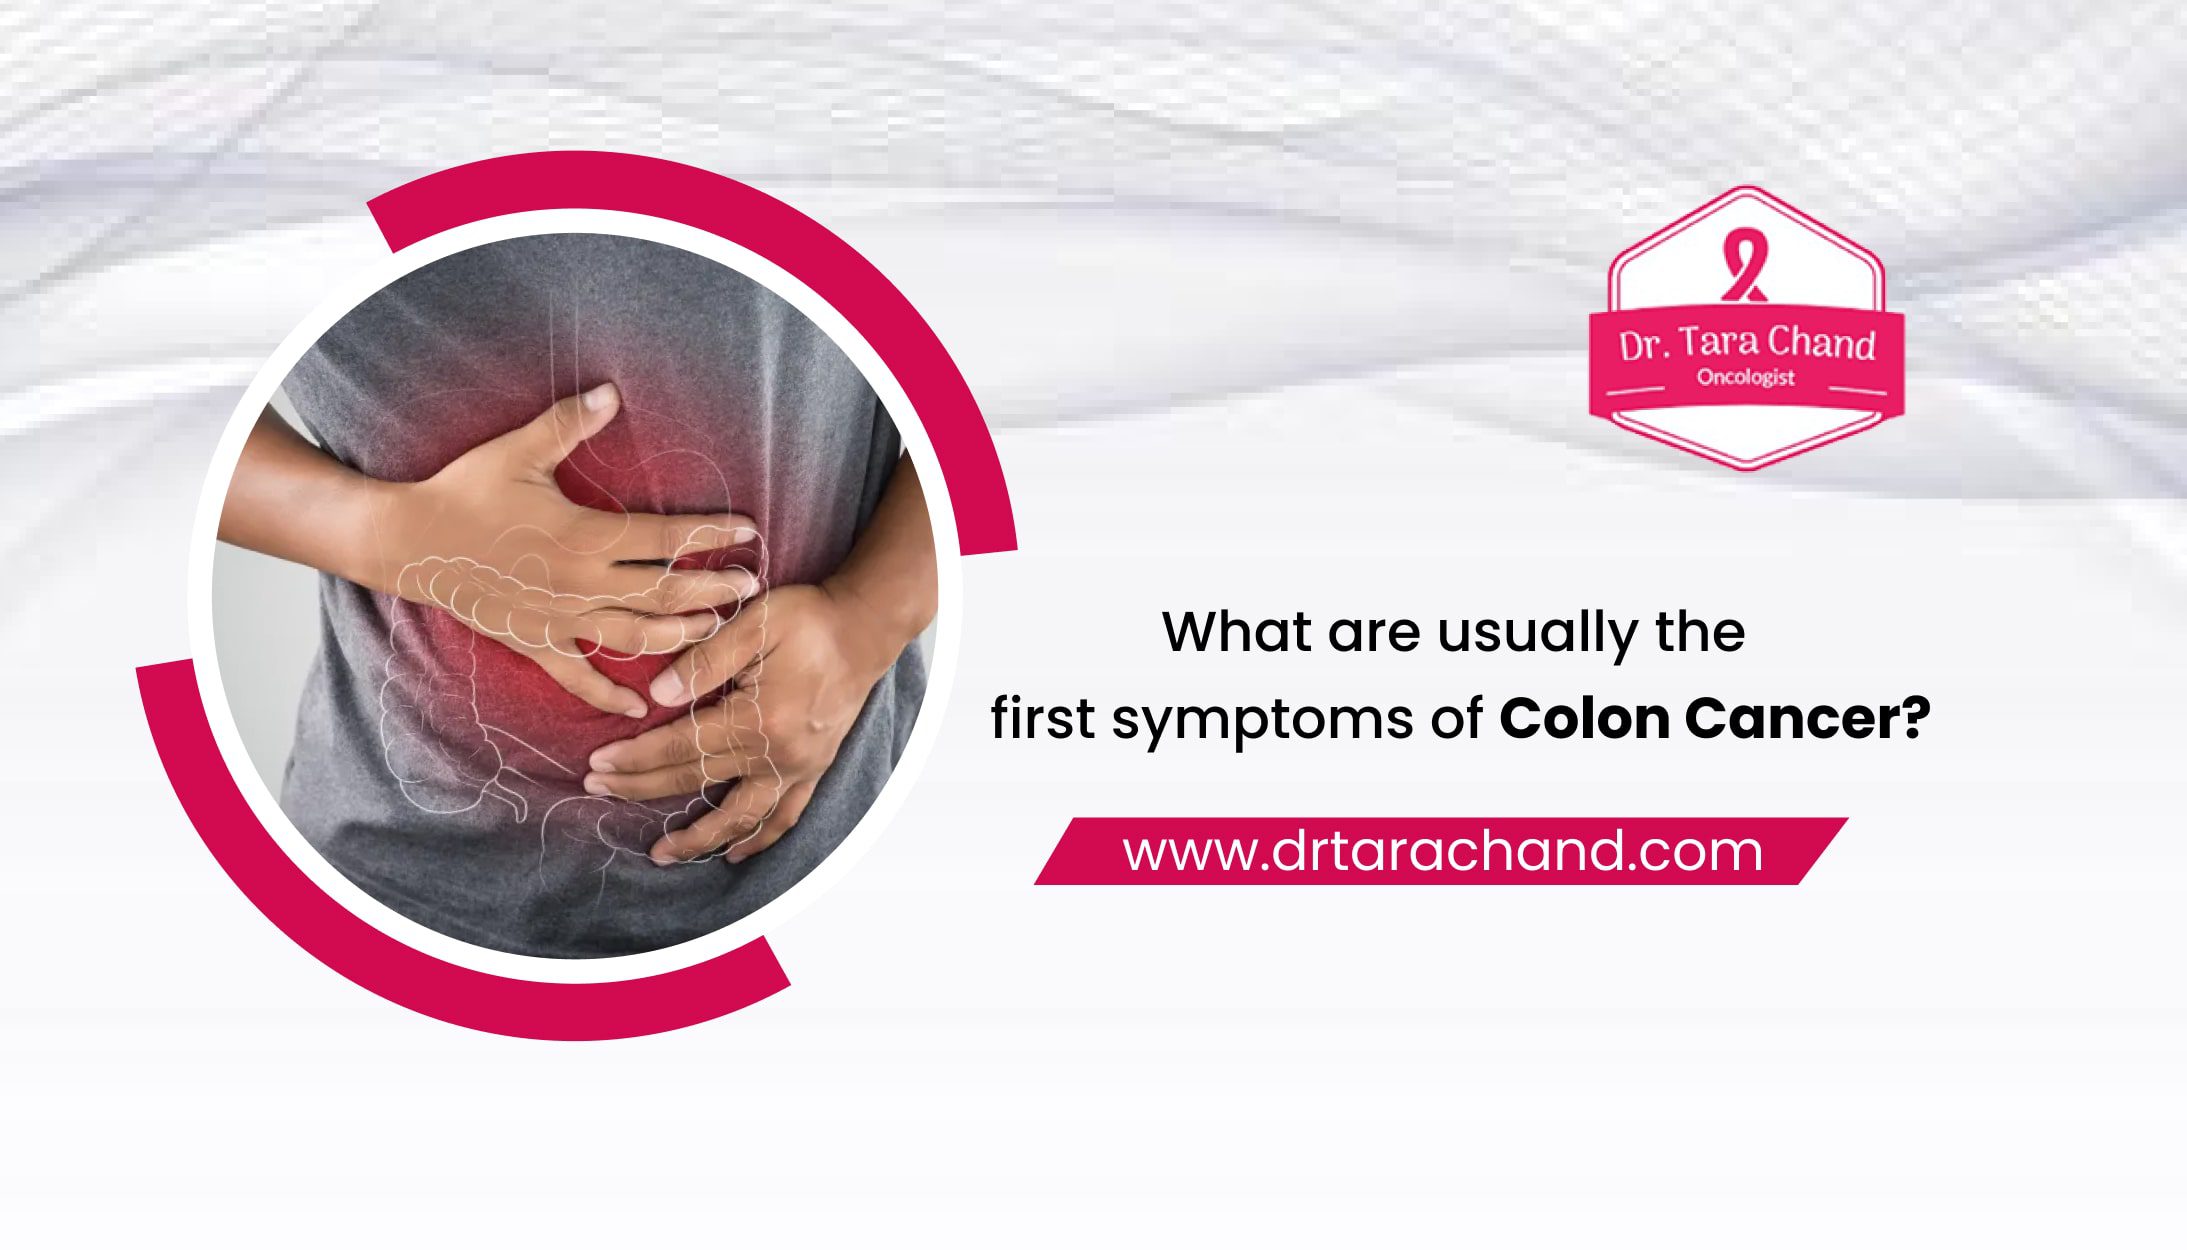 What are usually the first symptom of colon cancer?